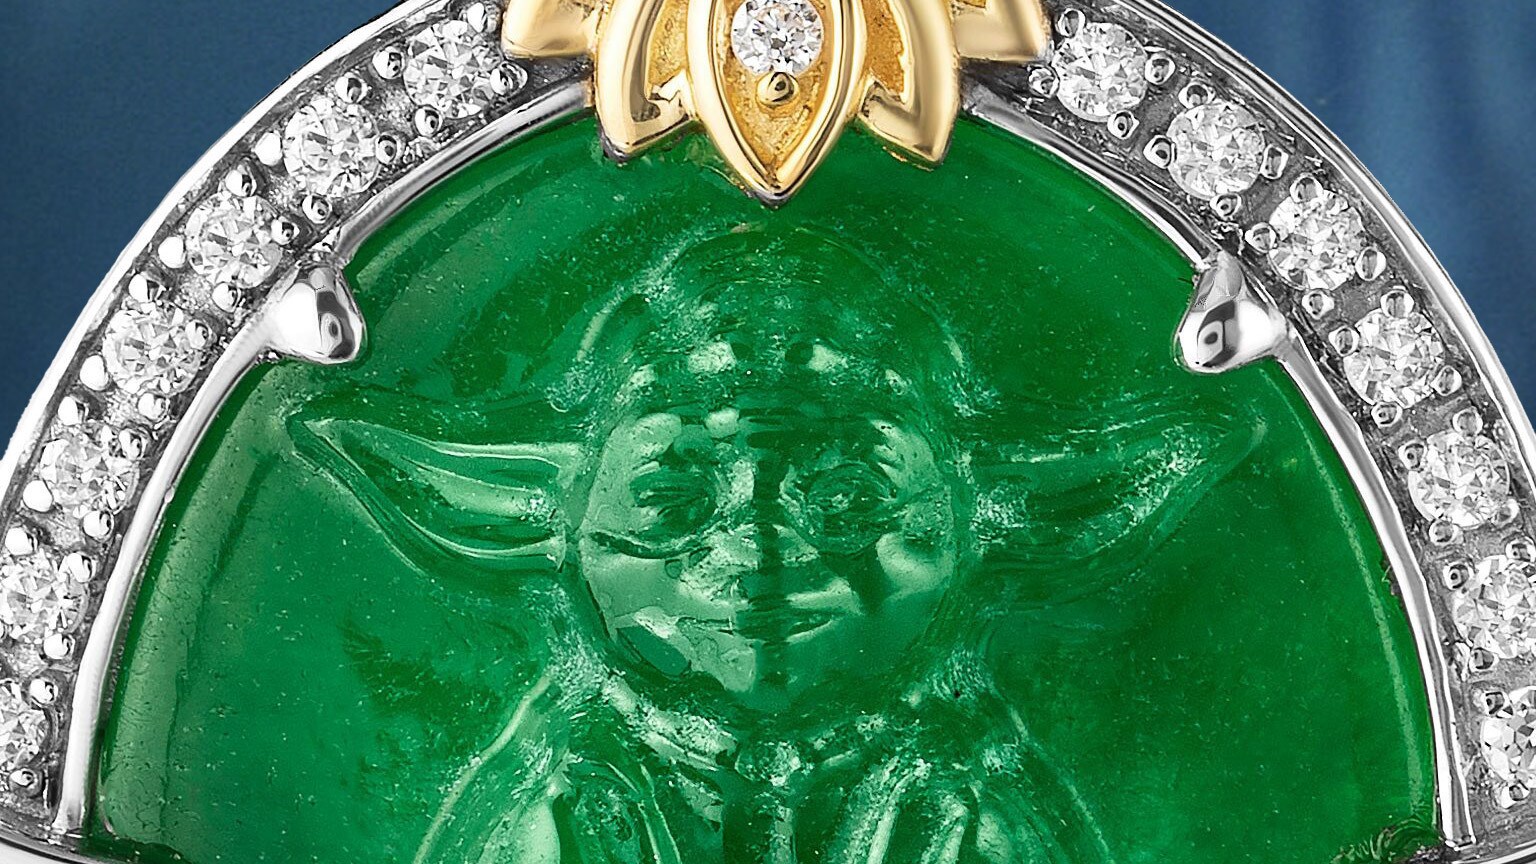 How Eastern Philosophy and Film Details Inspired Star Wars Fine Jewelry